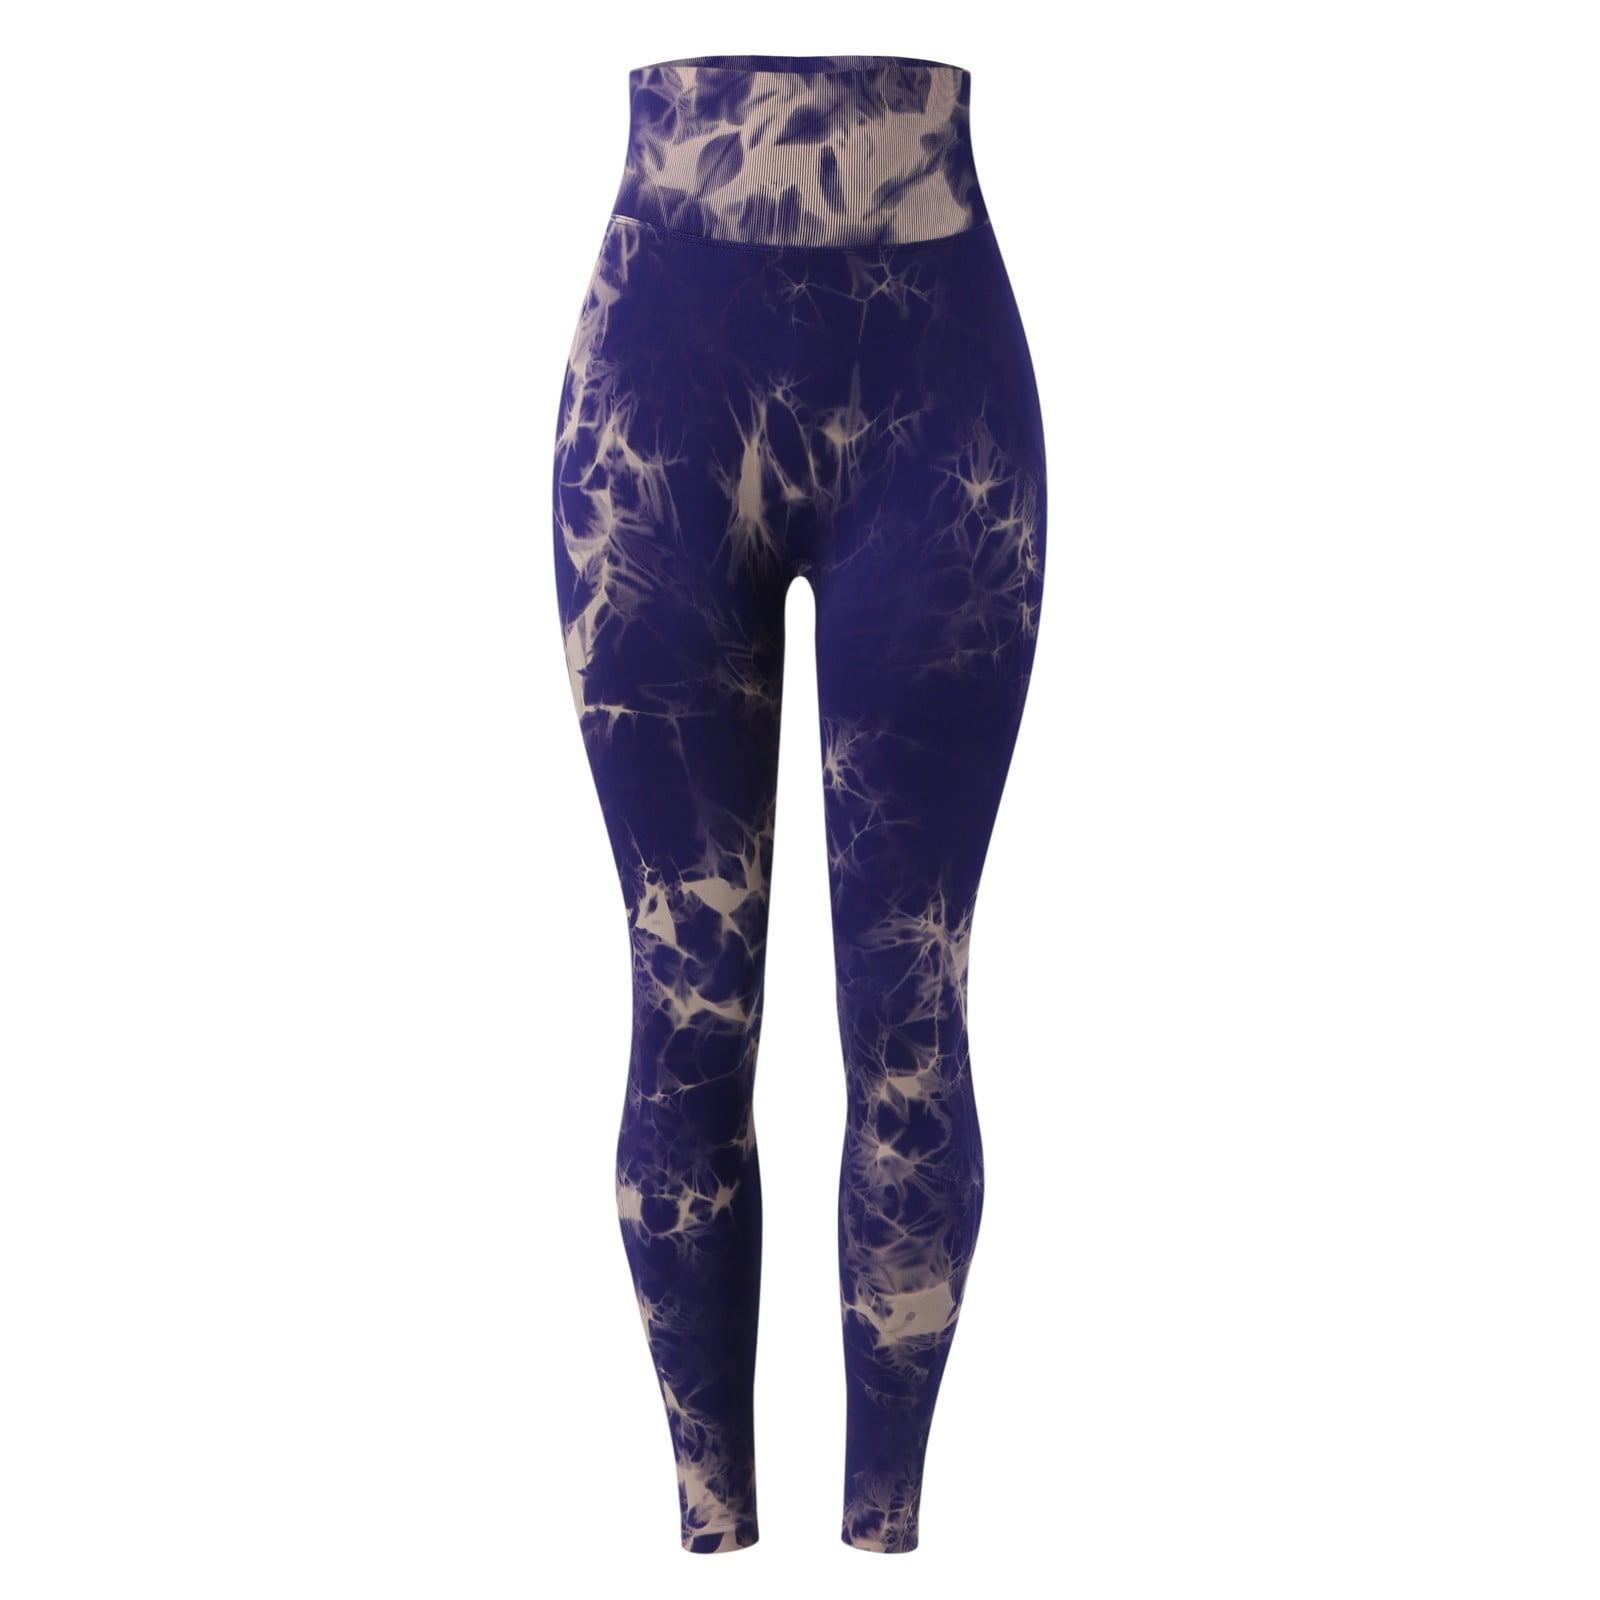 High Waisted Seamless Yoga Light Purple Leggings For Fitness And Sport  Stretchy Contour Workout Pants With Butt Lifting And Sexy Stretch Fit  H220429 From Kaiser01, $11.25